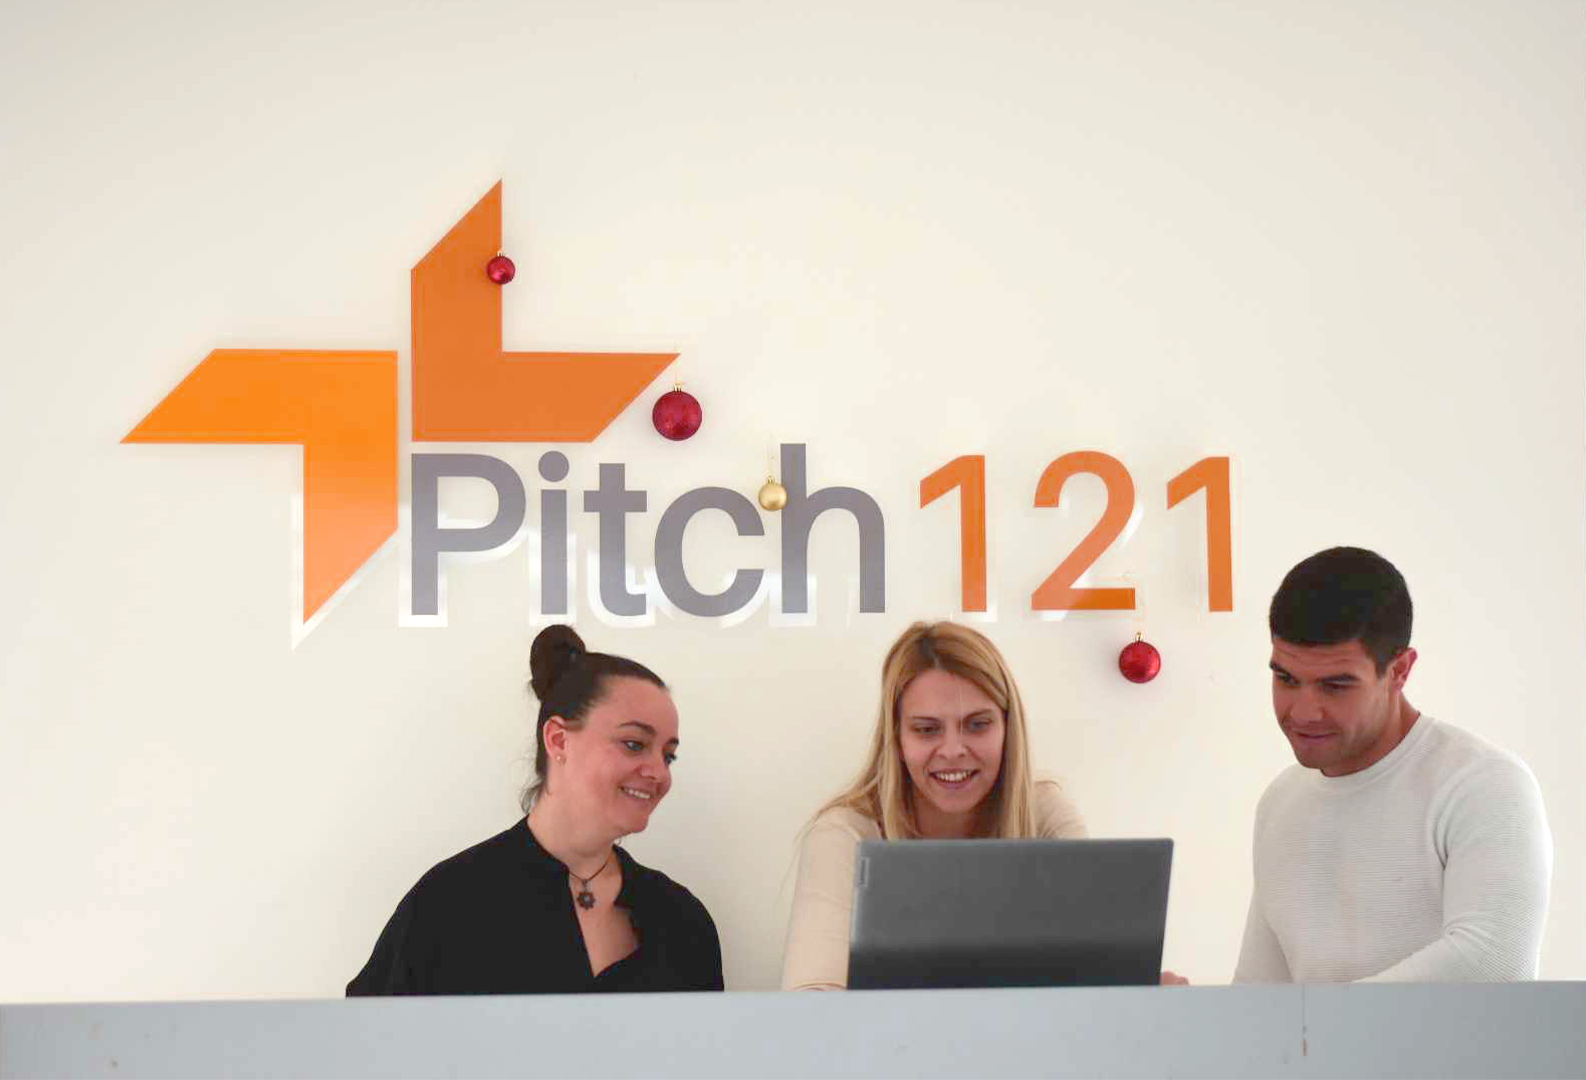 student visit at pitch 121